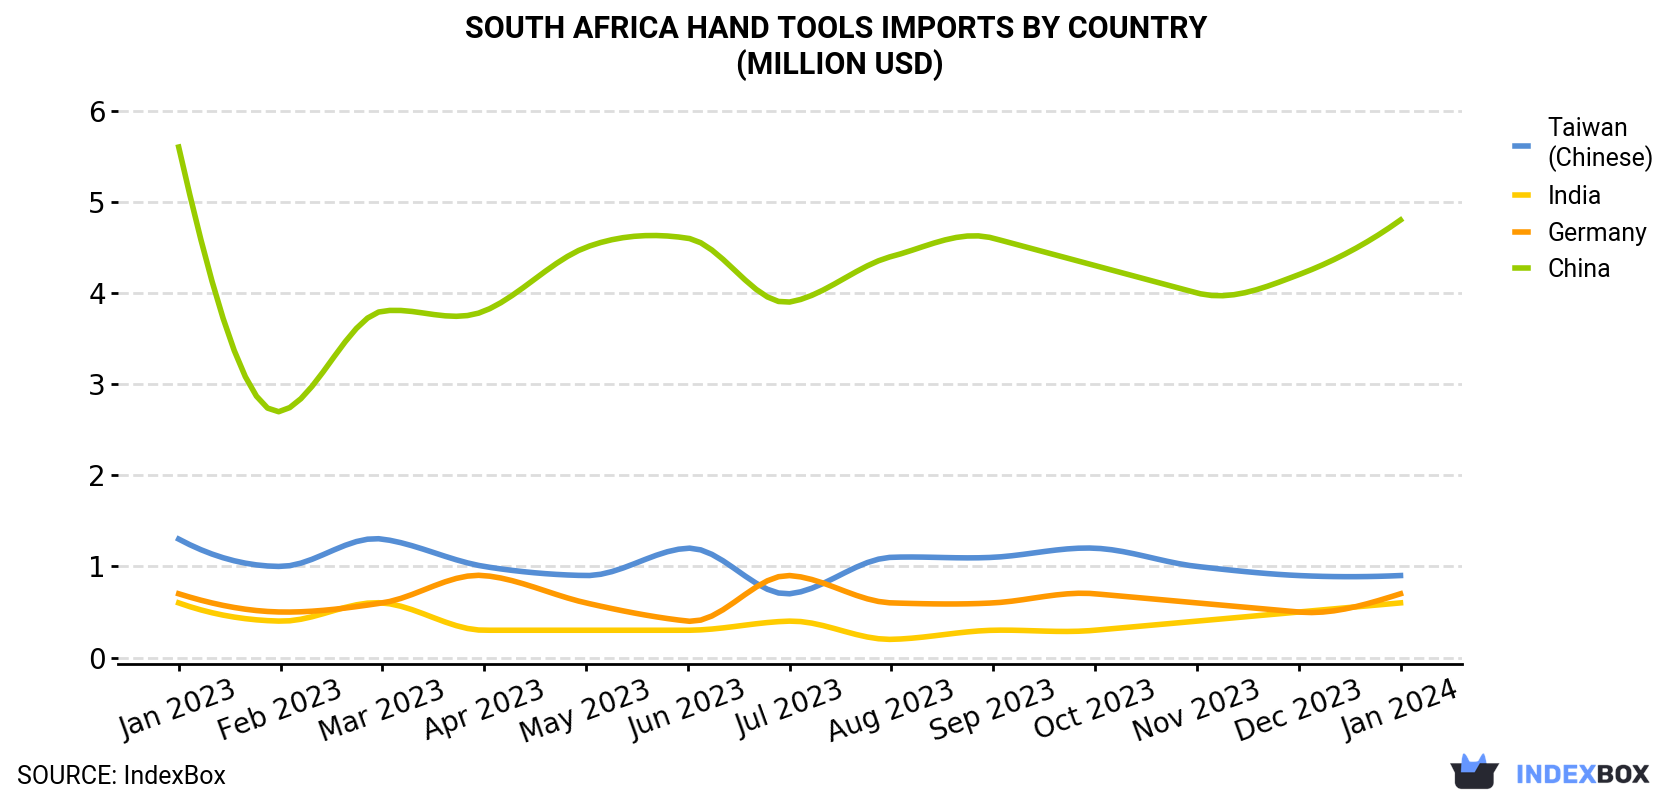 South Africa Hand Tools Imports By Country (Million USD)